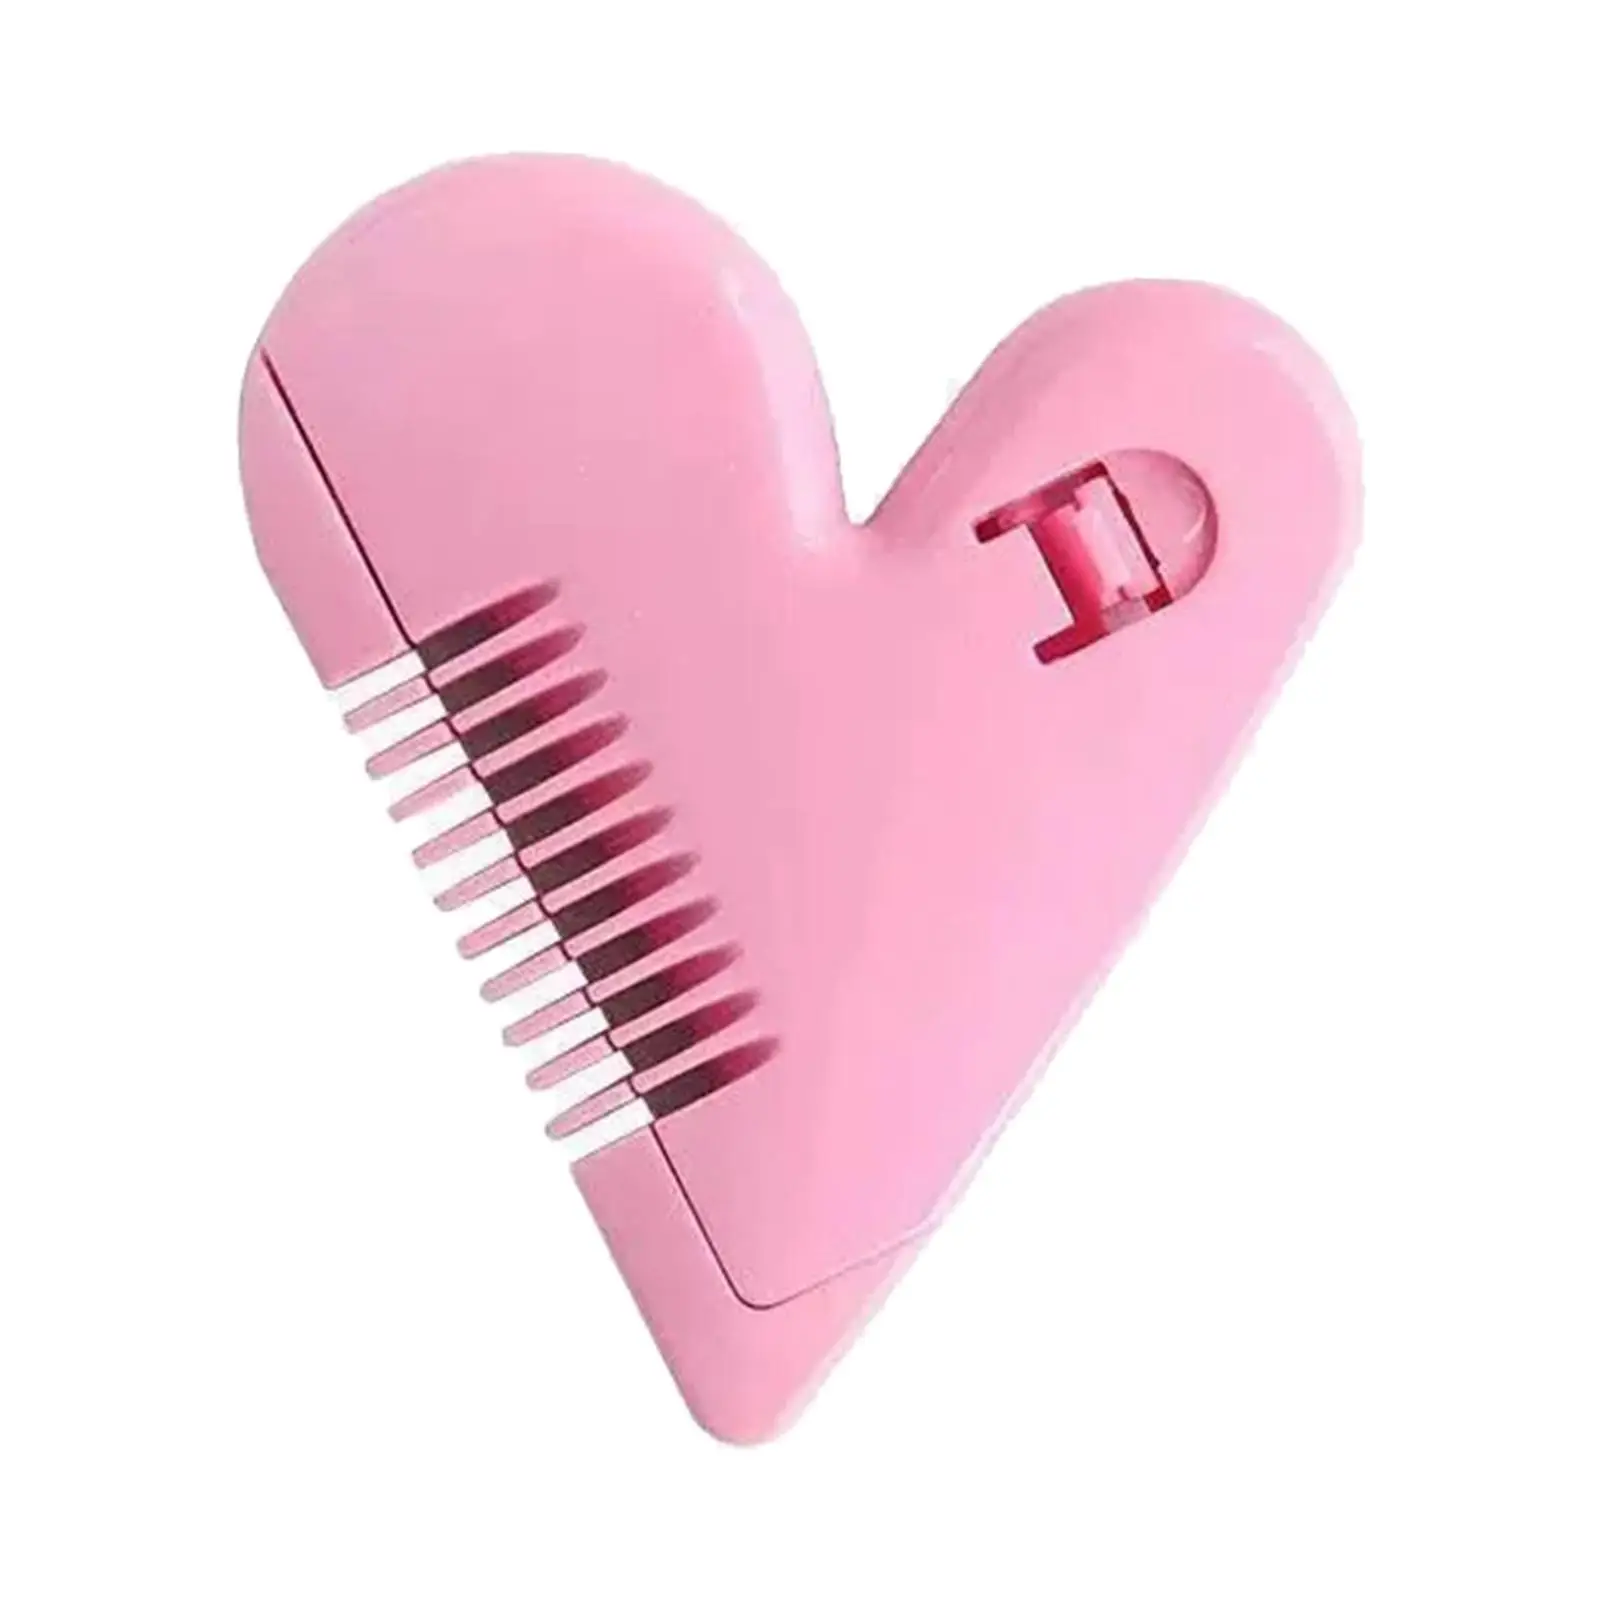 Mini Hair Trimmer Hairdressing Tool Trimming Bangs Hand Tools Hair Cutting Thinning Comb for Home Use Thin and Thick Hair Girls